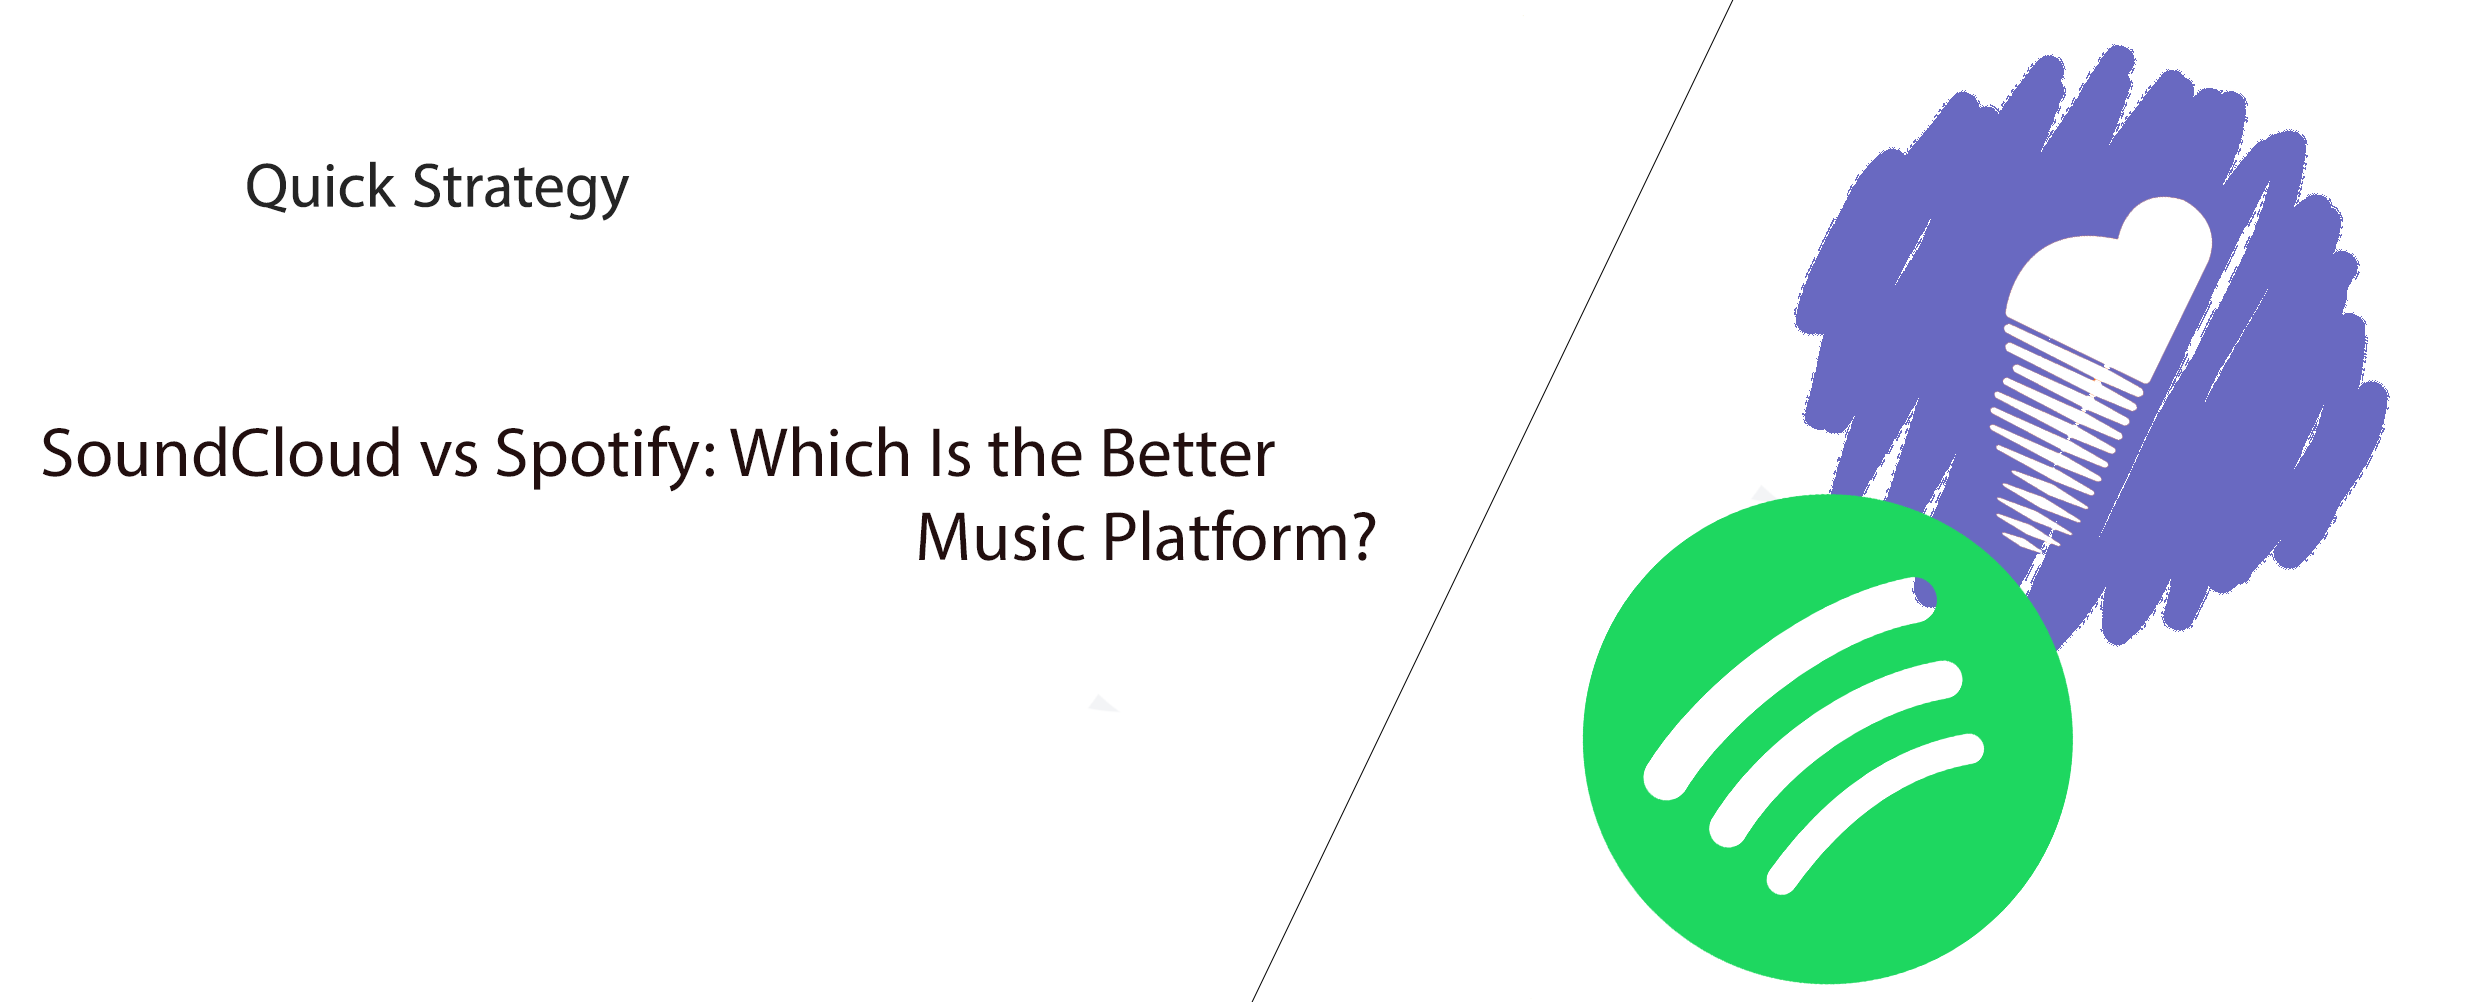 SoundCloud vs Spotify: Which Is the Better Music Platform?